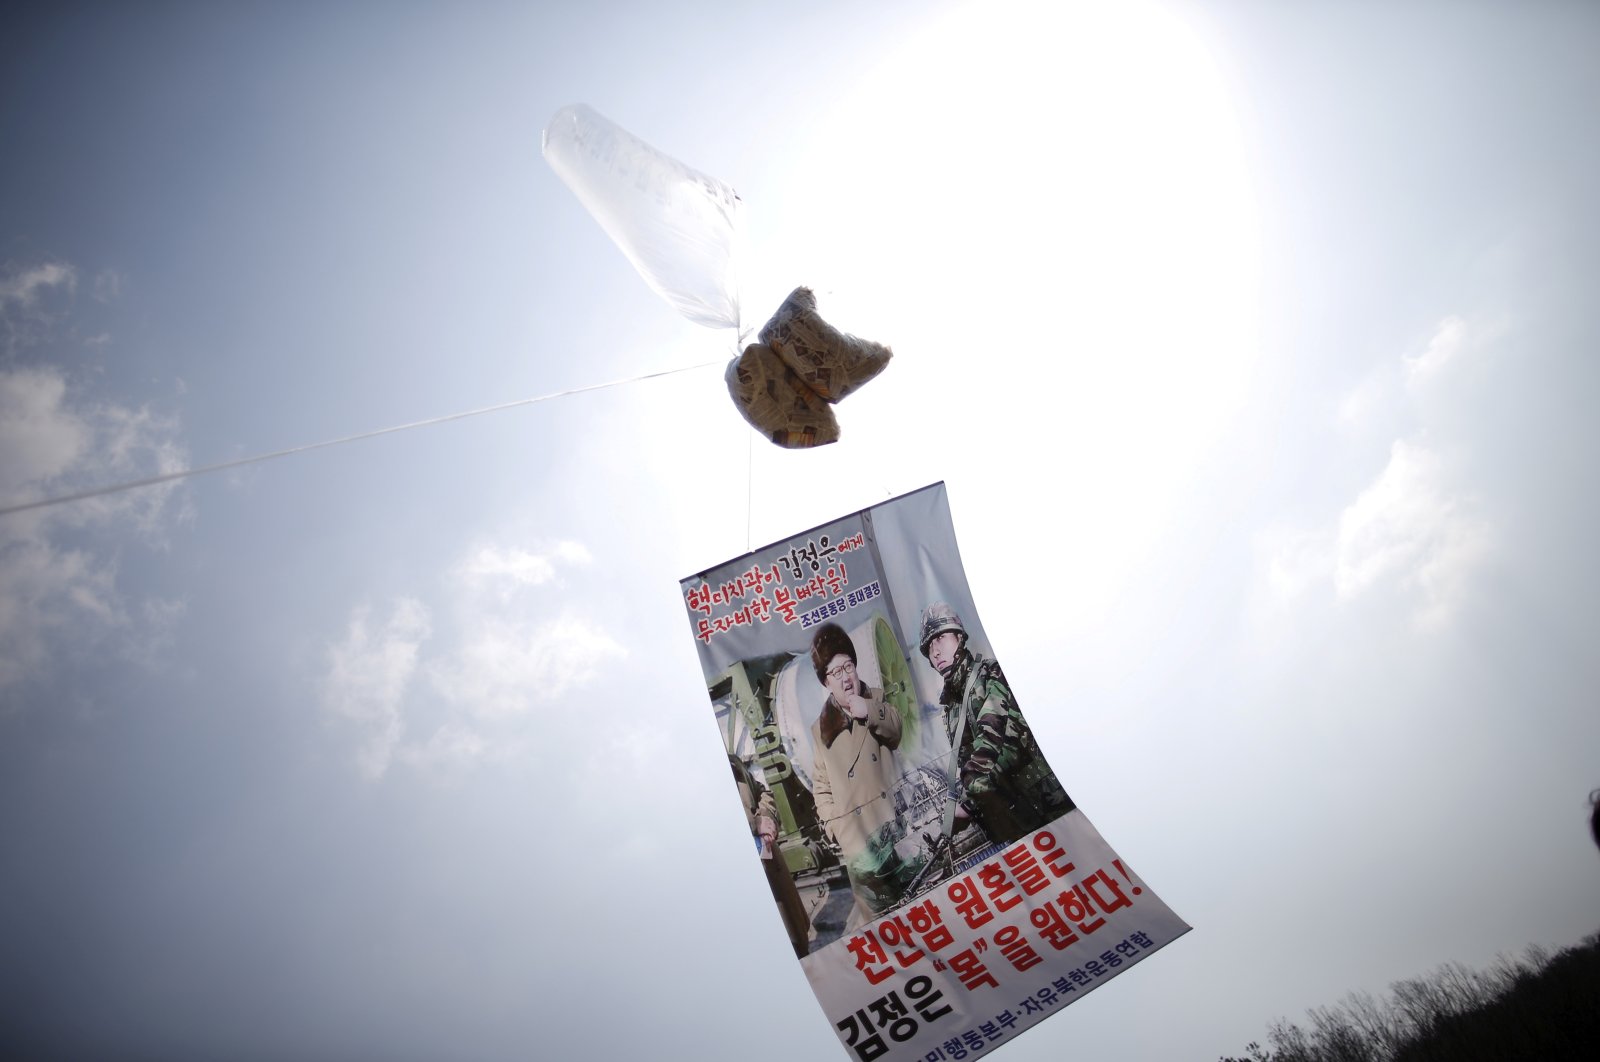 A balloon containing leaflets denouncing North Korean leader Kim Jong Un is seen near the demilitarized zone separating the two Koreas in Paju, South Korea, March 26, 2016. (Reuters Photo)